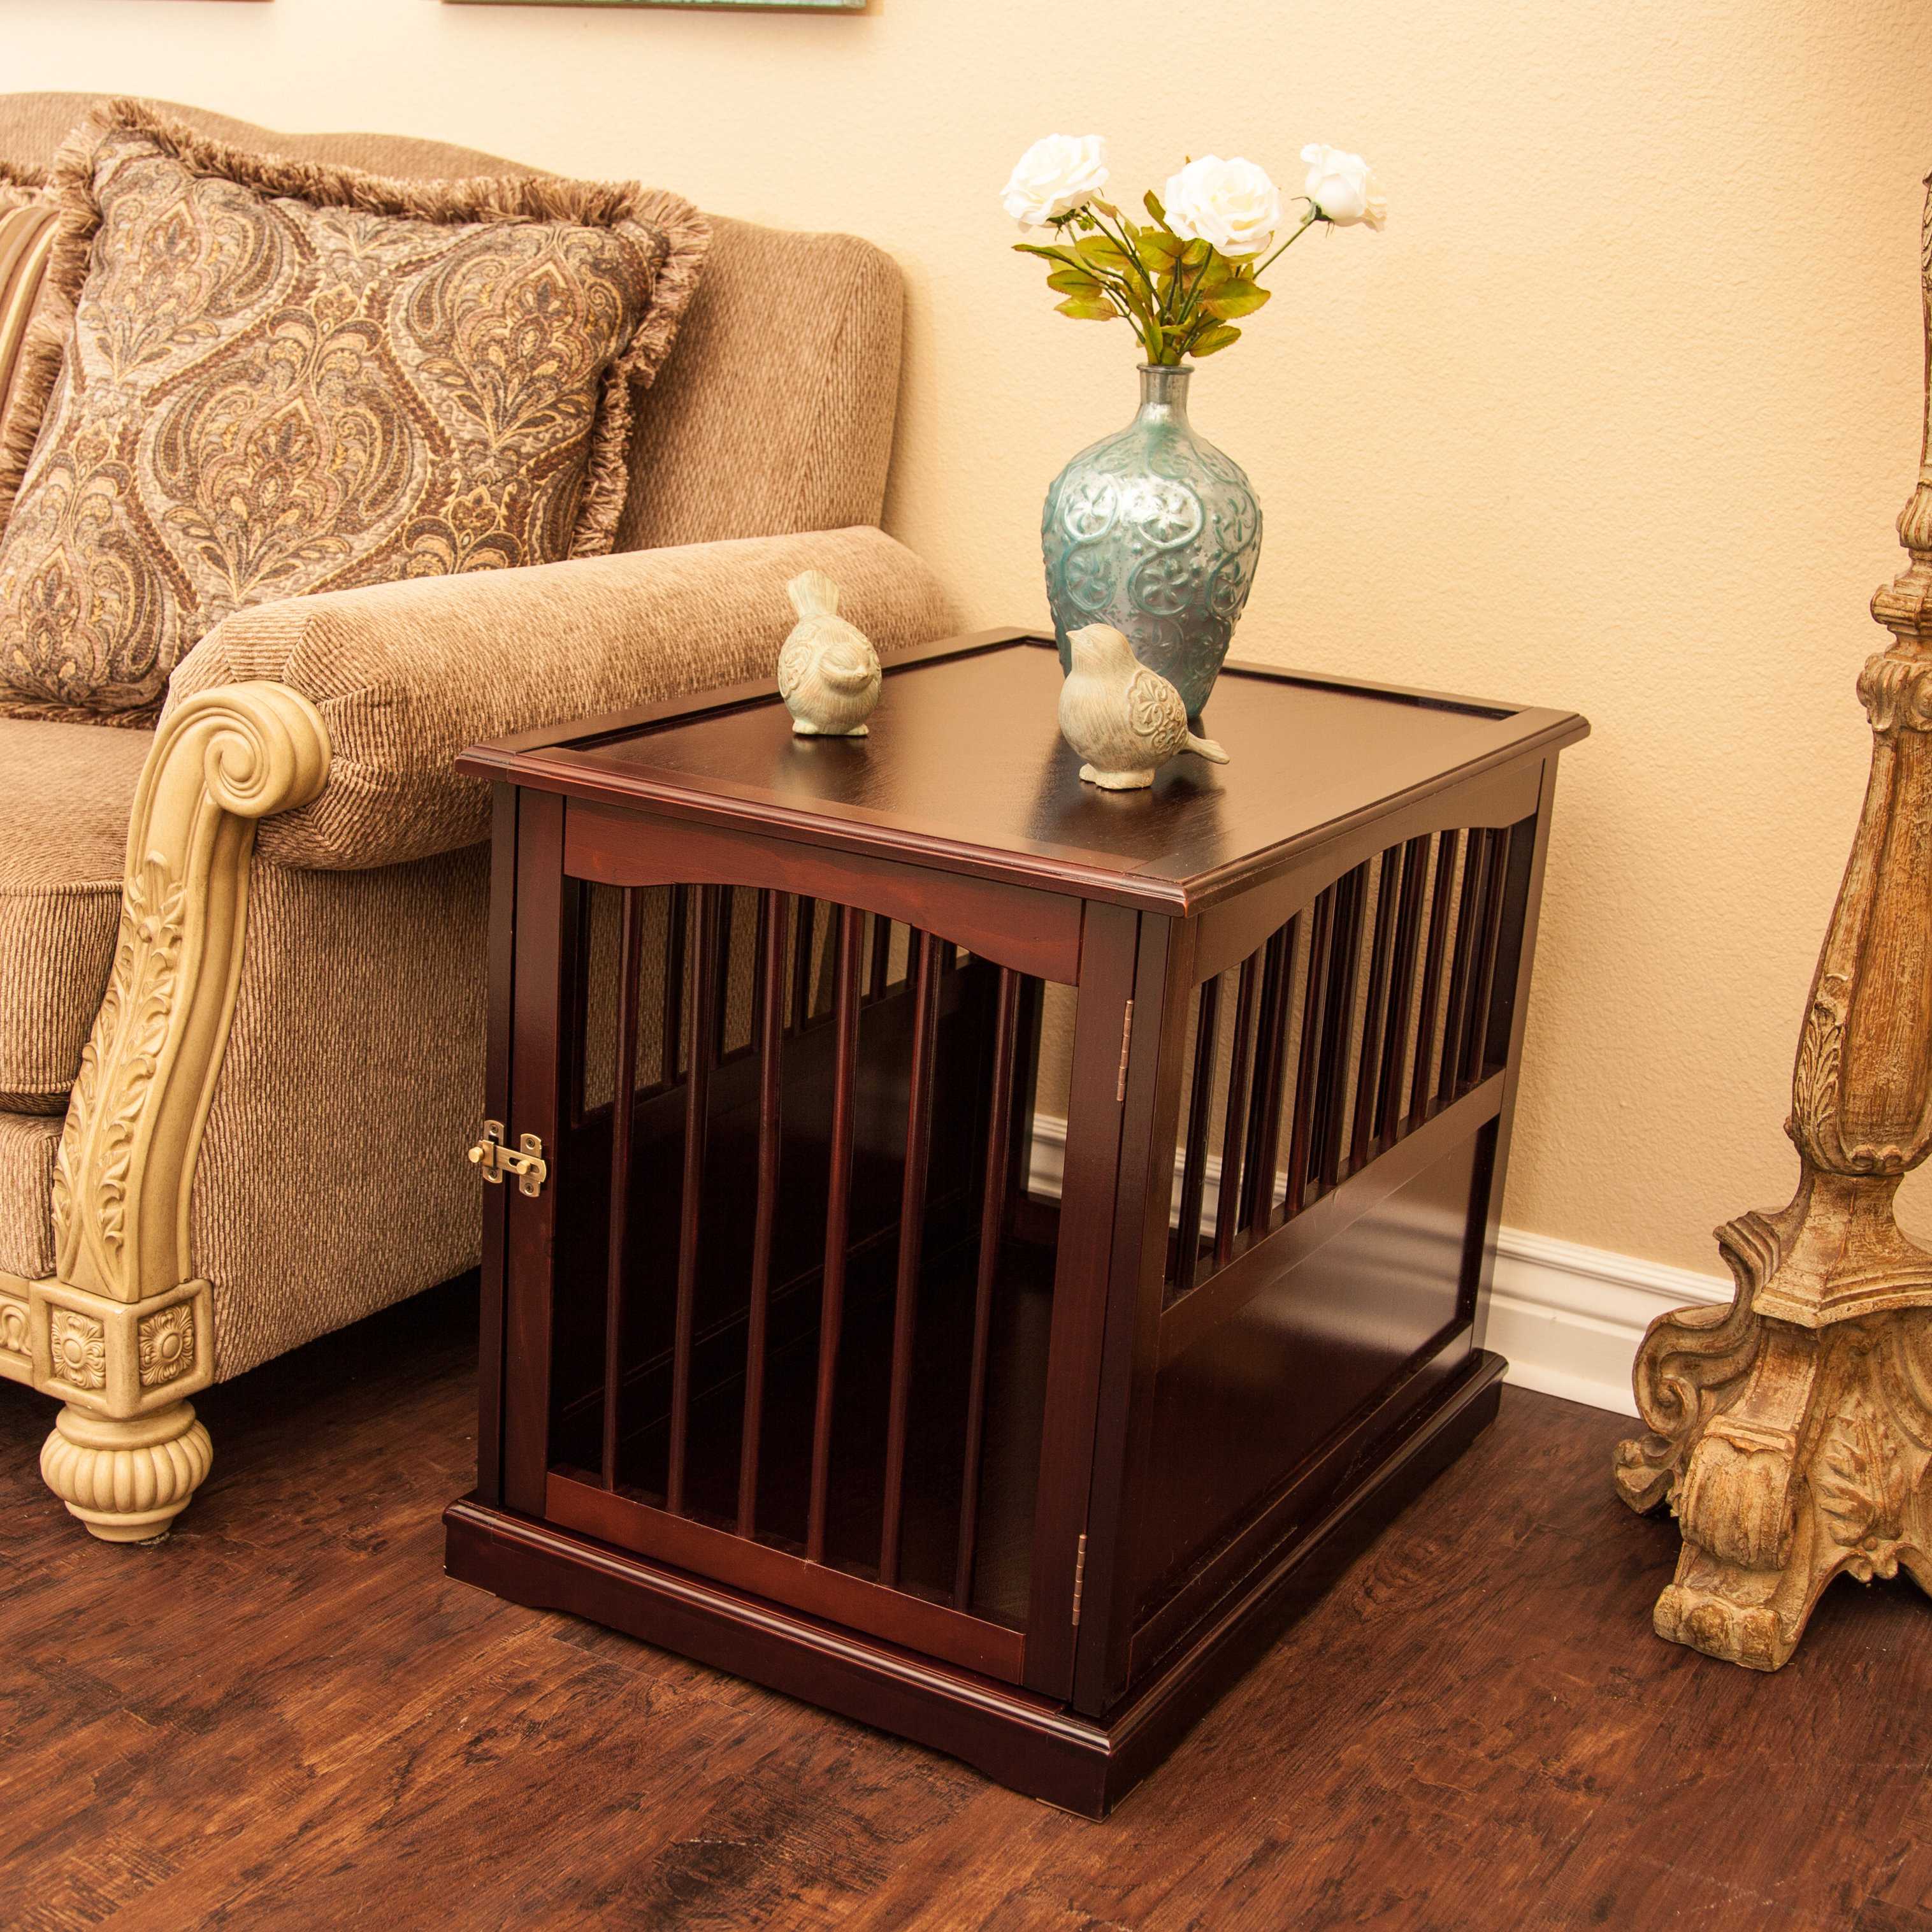 primetime petz pet crate end table walnut dog crates that look like tables our sites inexpensive nightstands wildon home furniture modern contemporary glass coffee magnolia farms